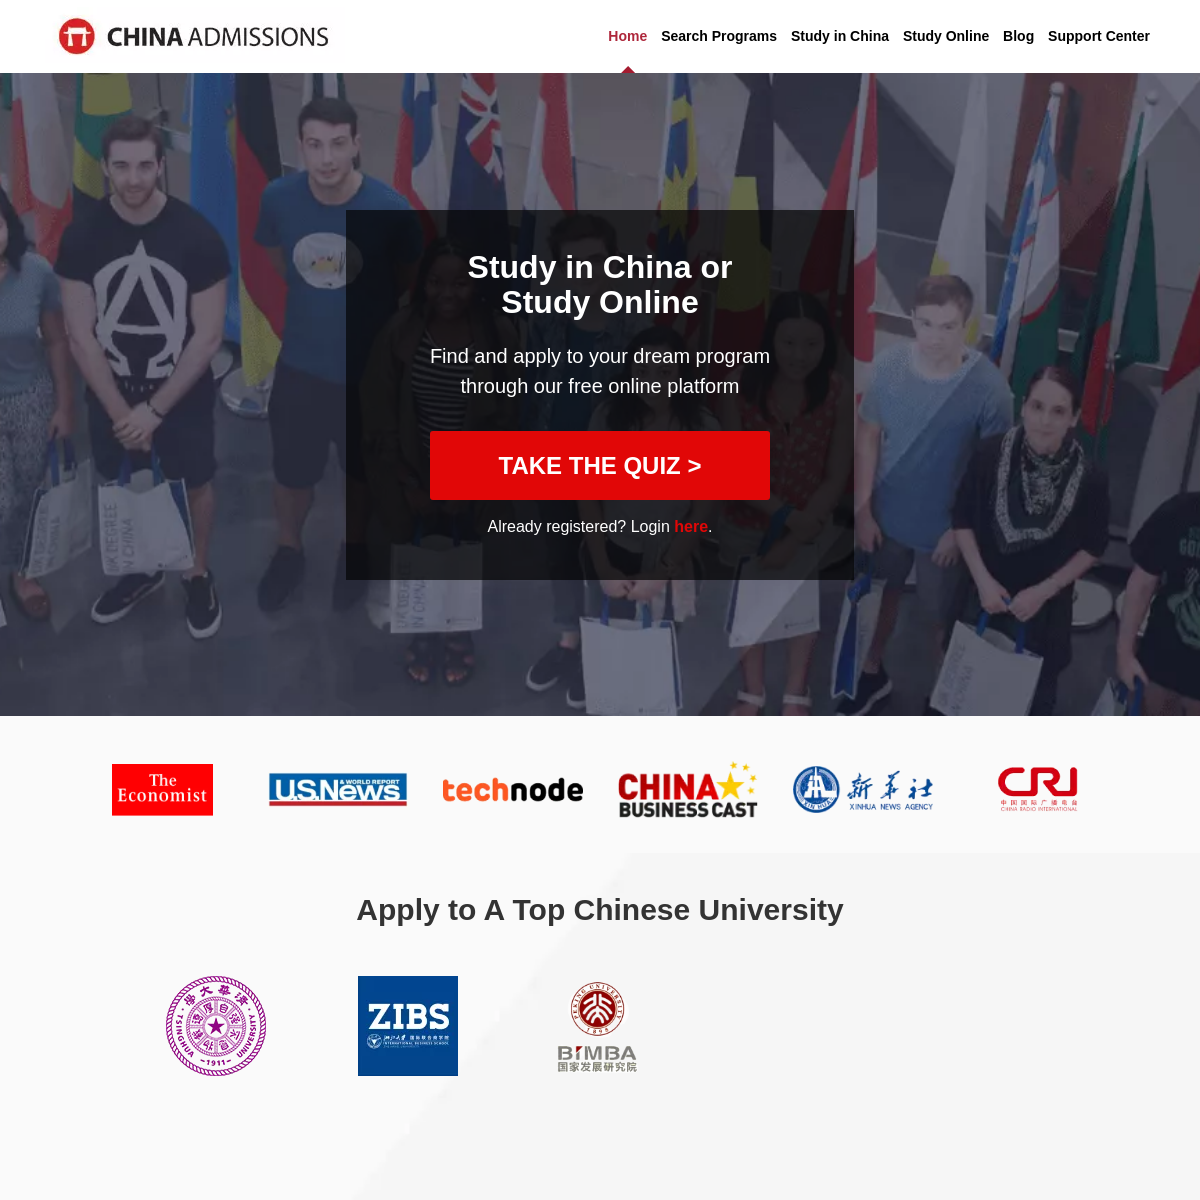 A complete backup of china-admissions.com